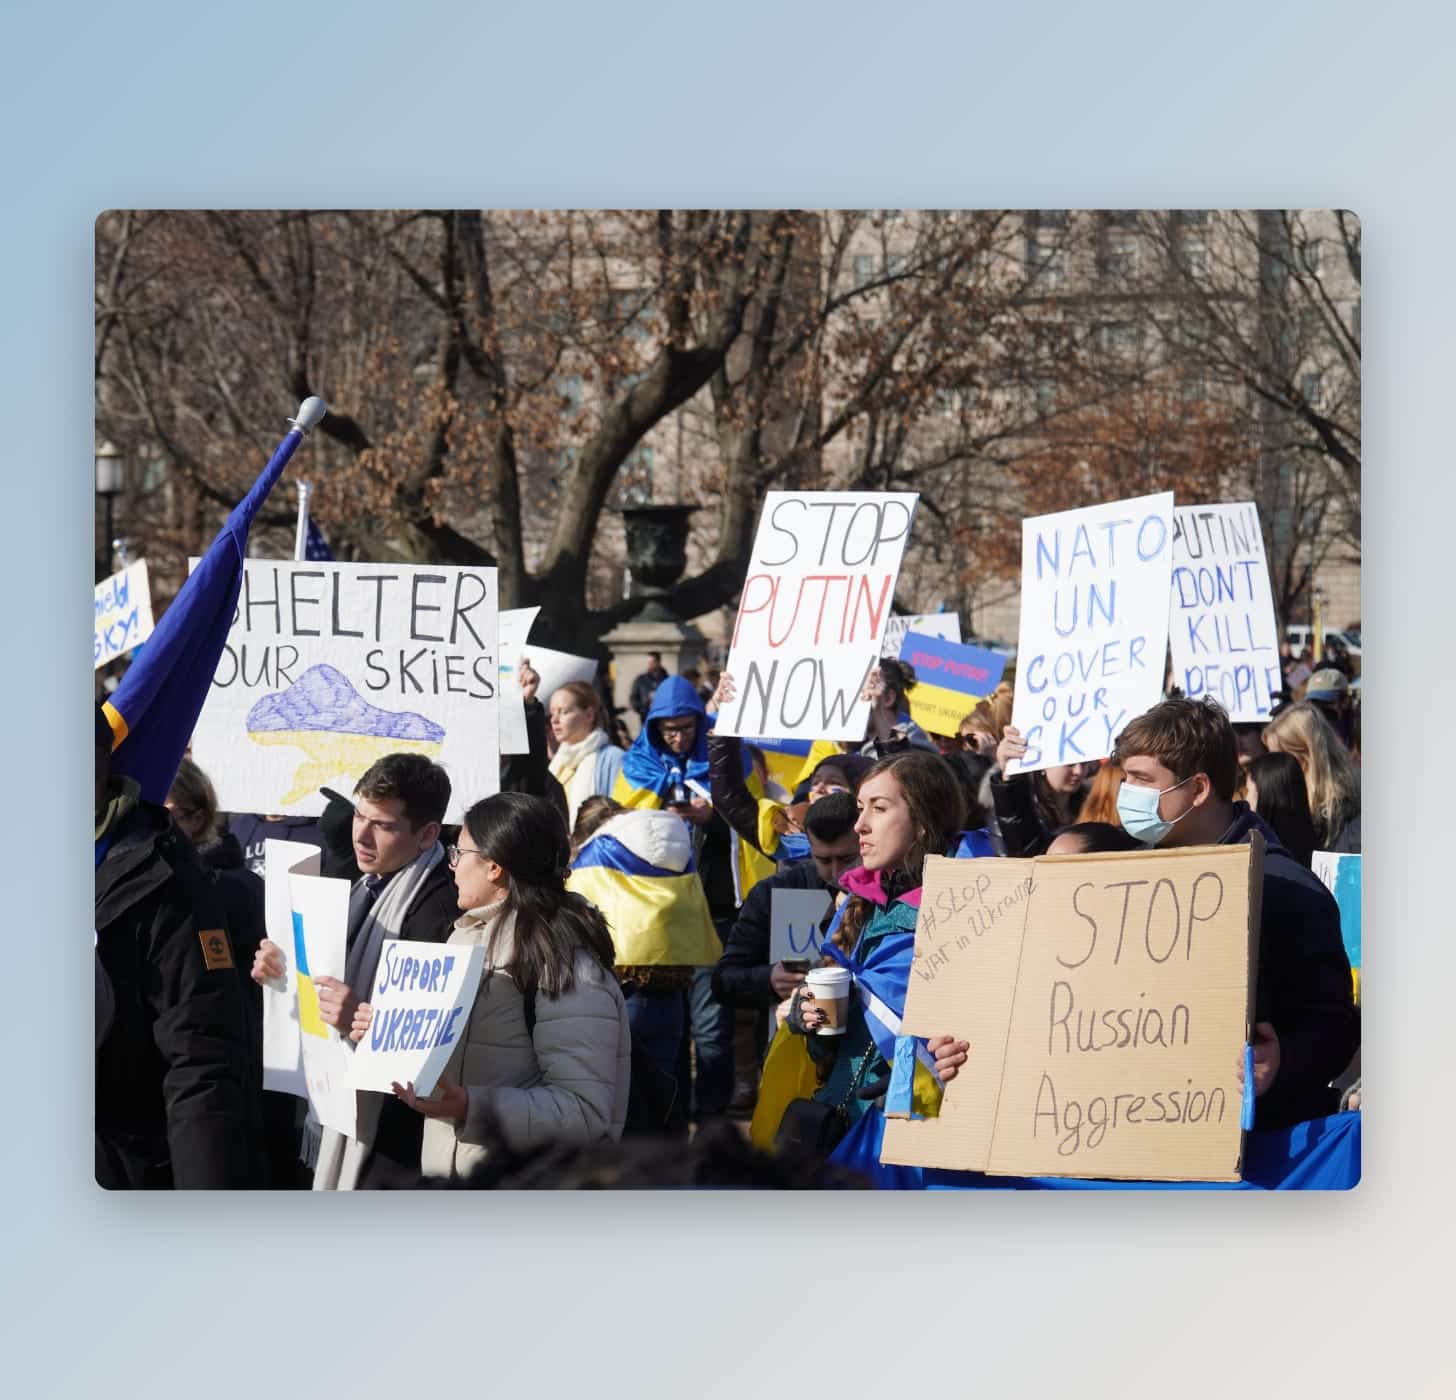 People hold signs in support of Ukraine in USA